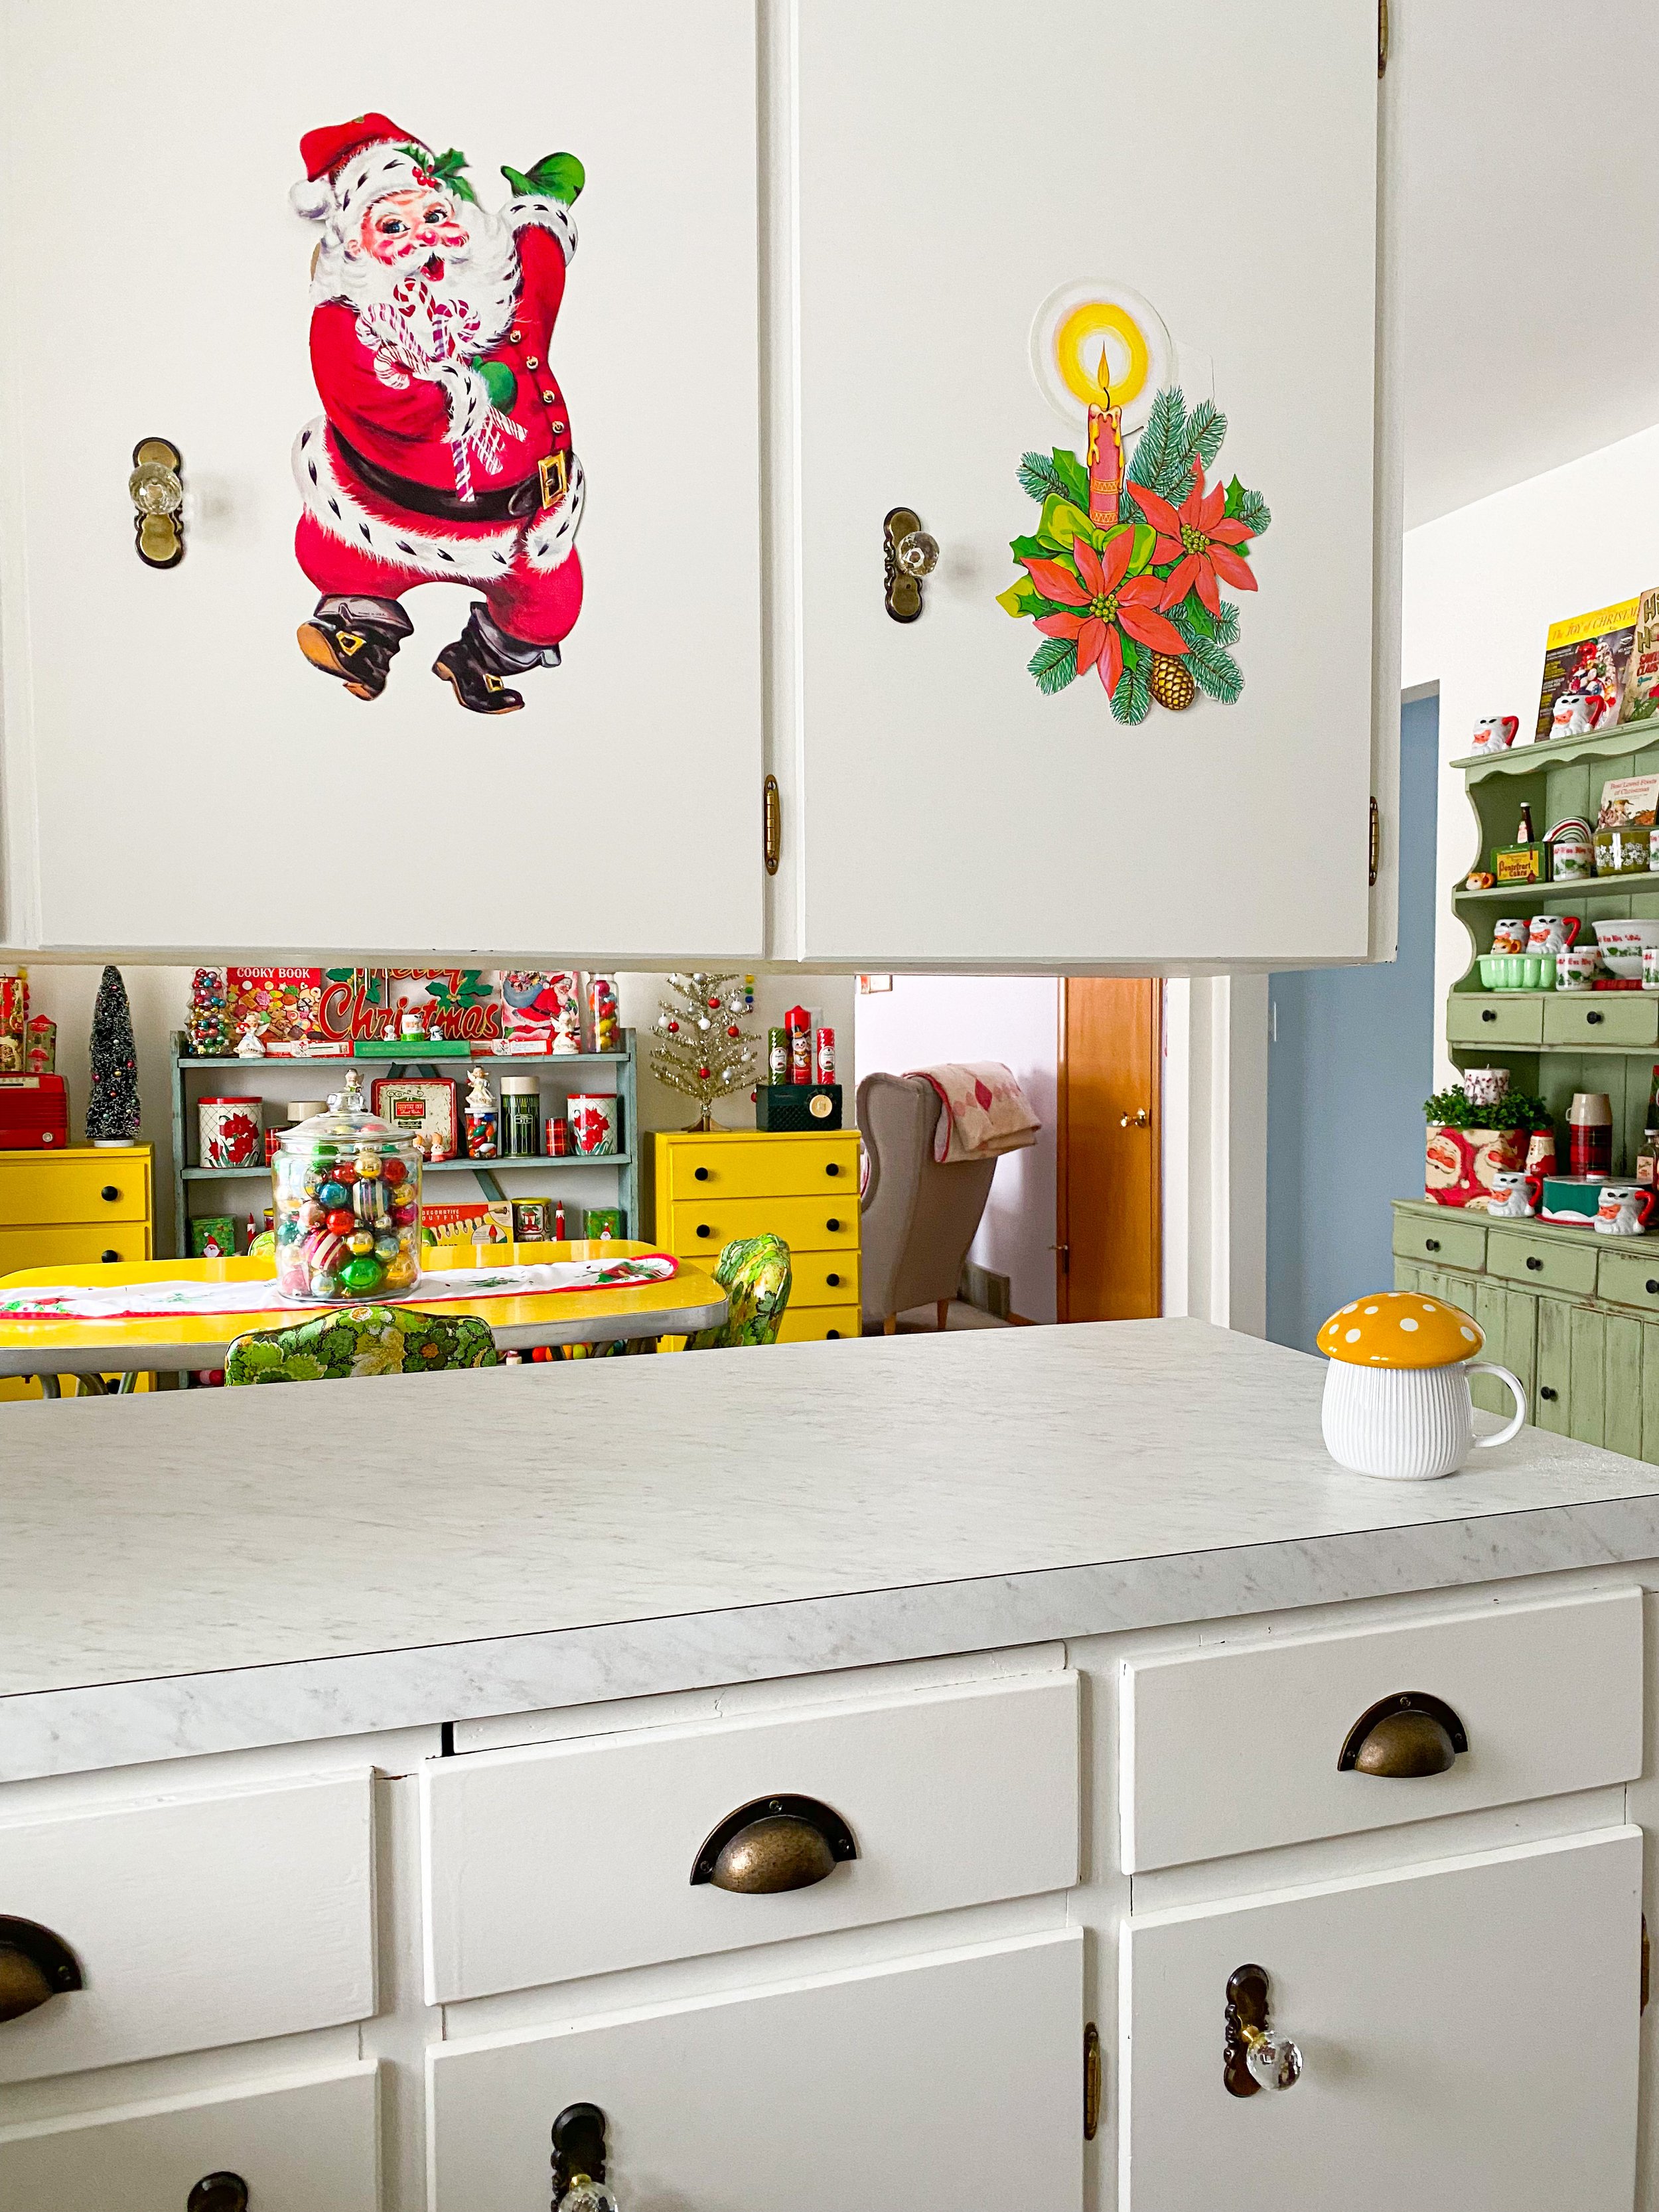 How to decorate kitchen cabinets for Christmas